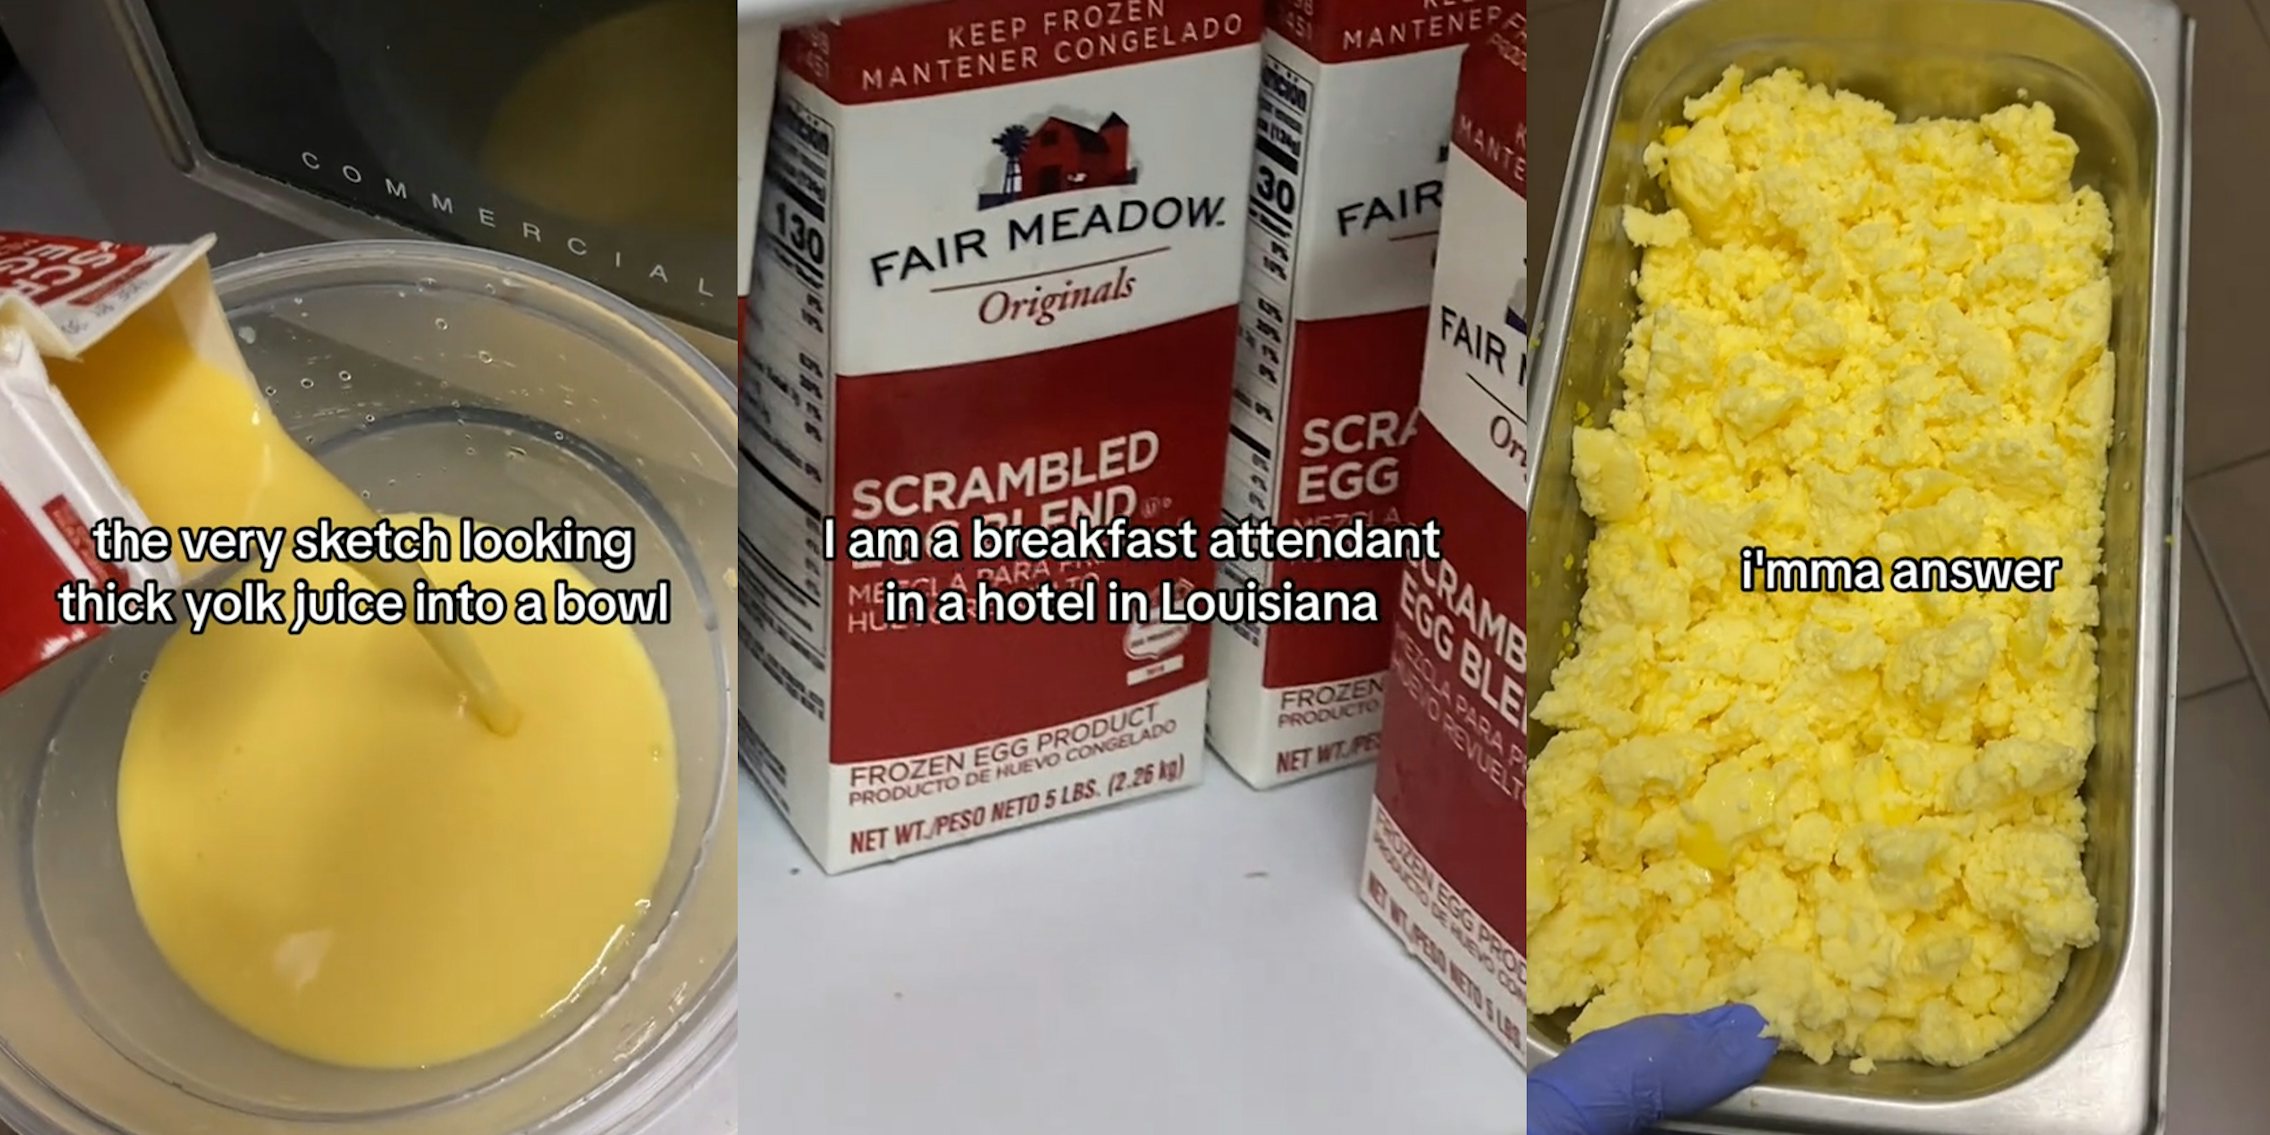 Hotel worker shows how they make scrambled eggs in the microwave